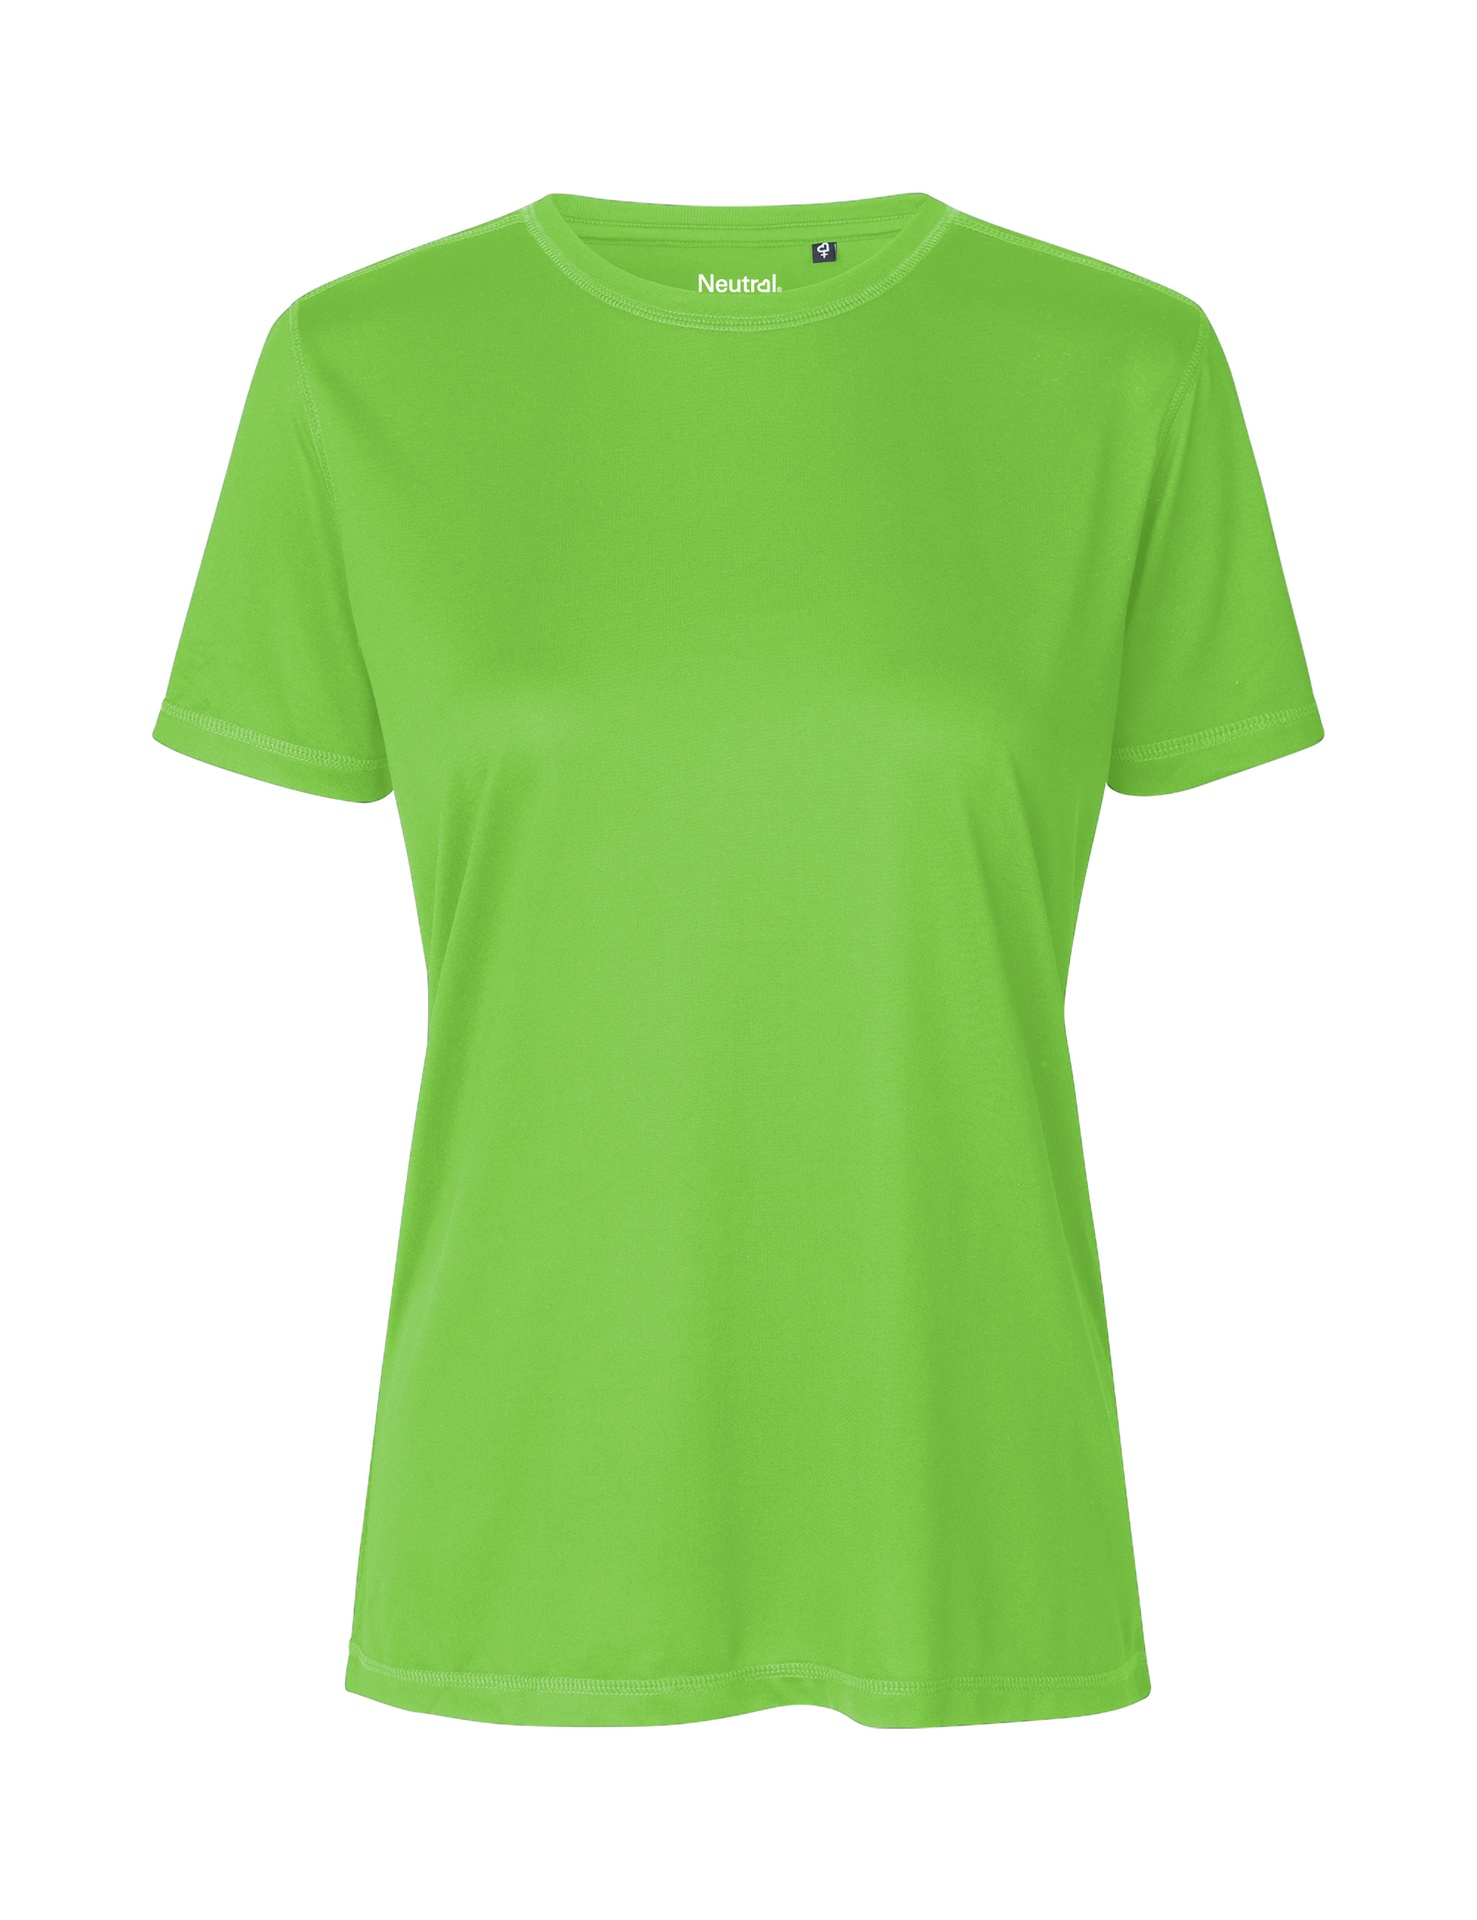 [PR/05223] Ladies Recycled Performance T-Shirt (Lime 12, S)